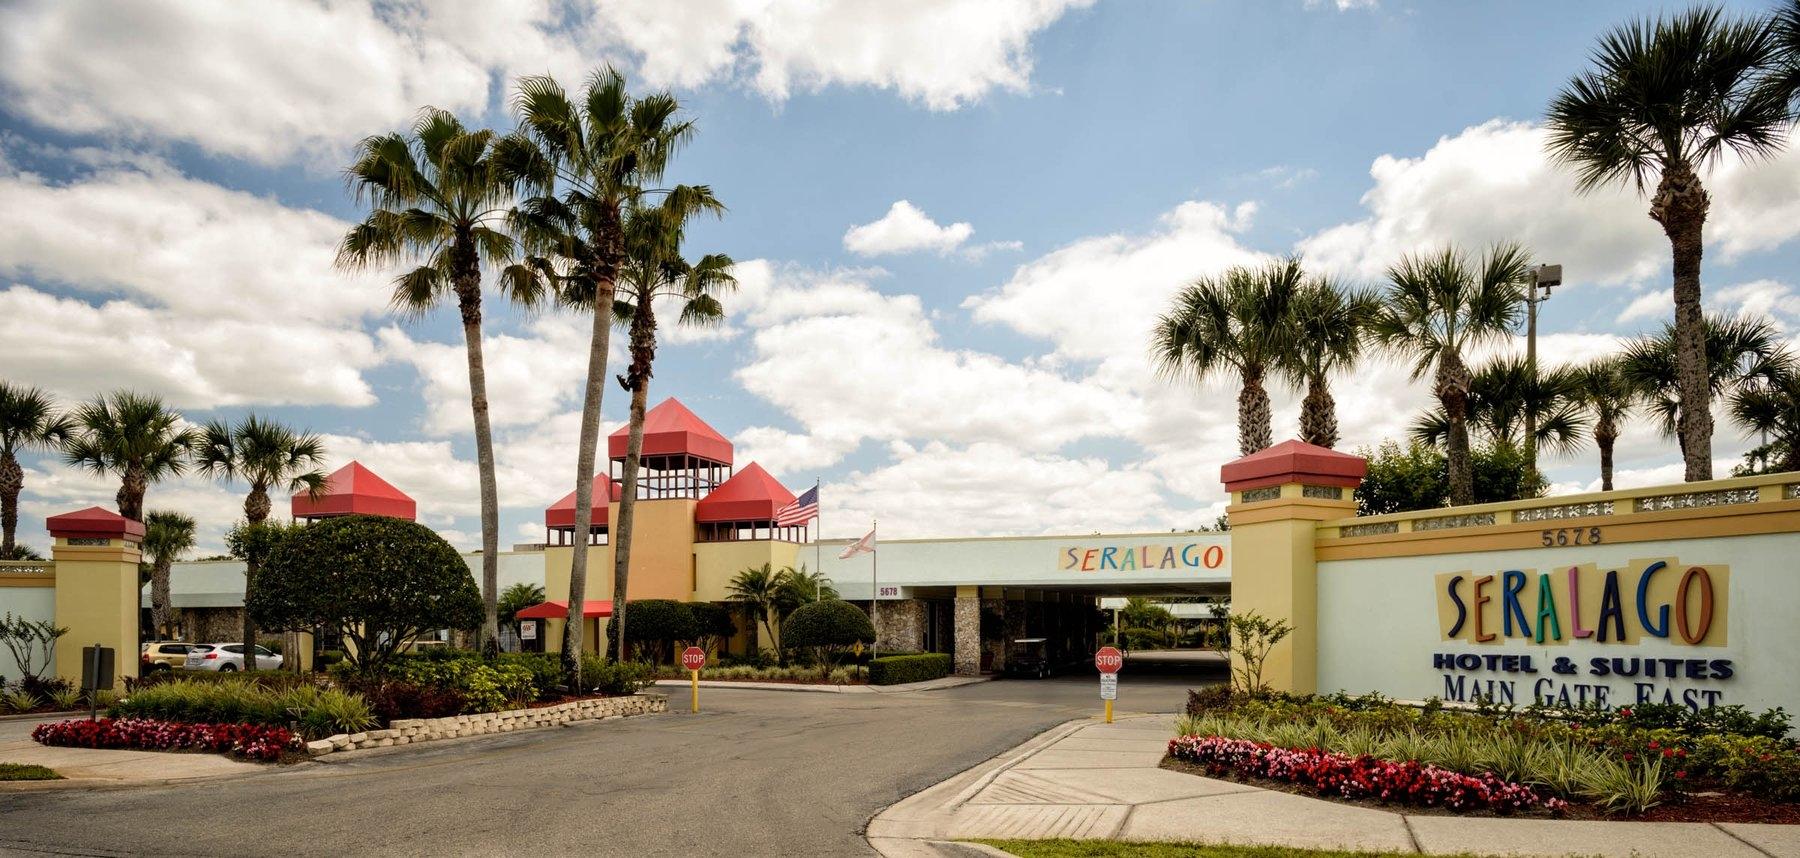 Contact Our Kissimmee FL Hotel Near Disney - Seralago Hotel & Suites